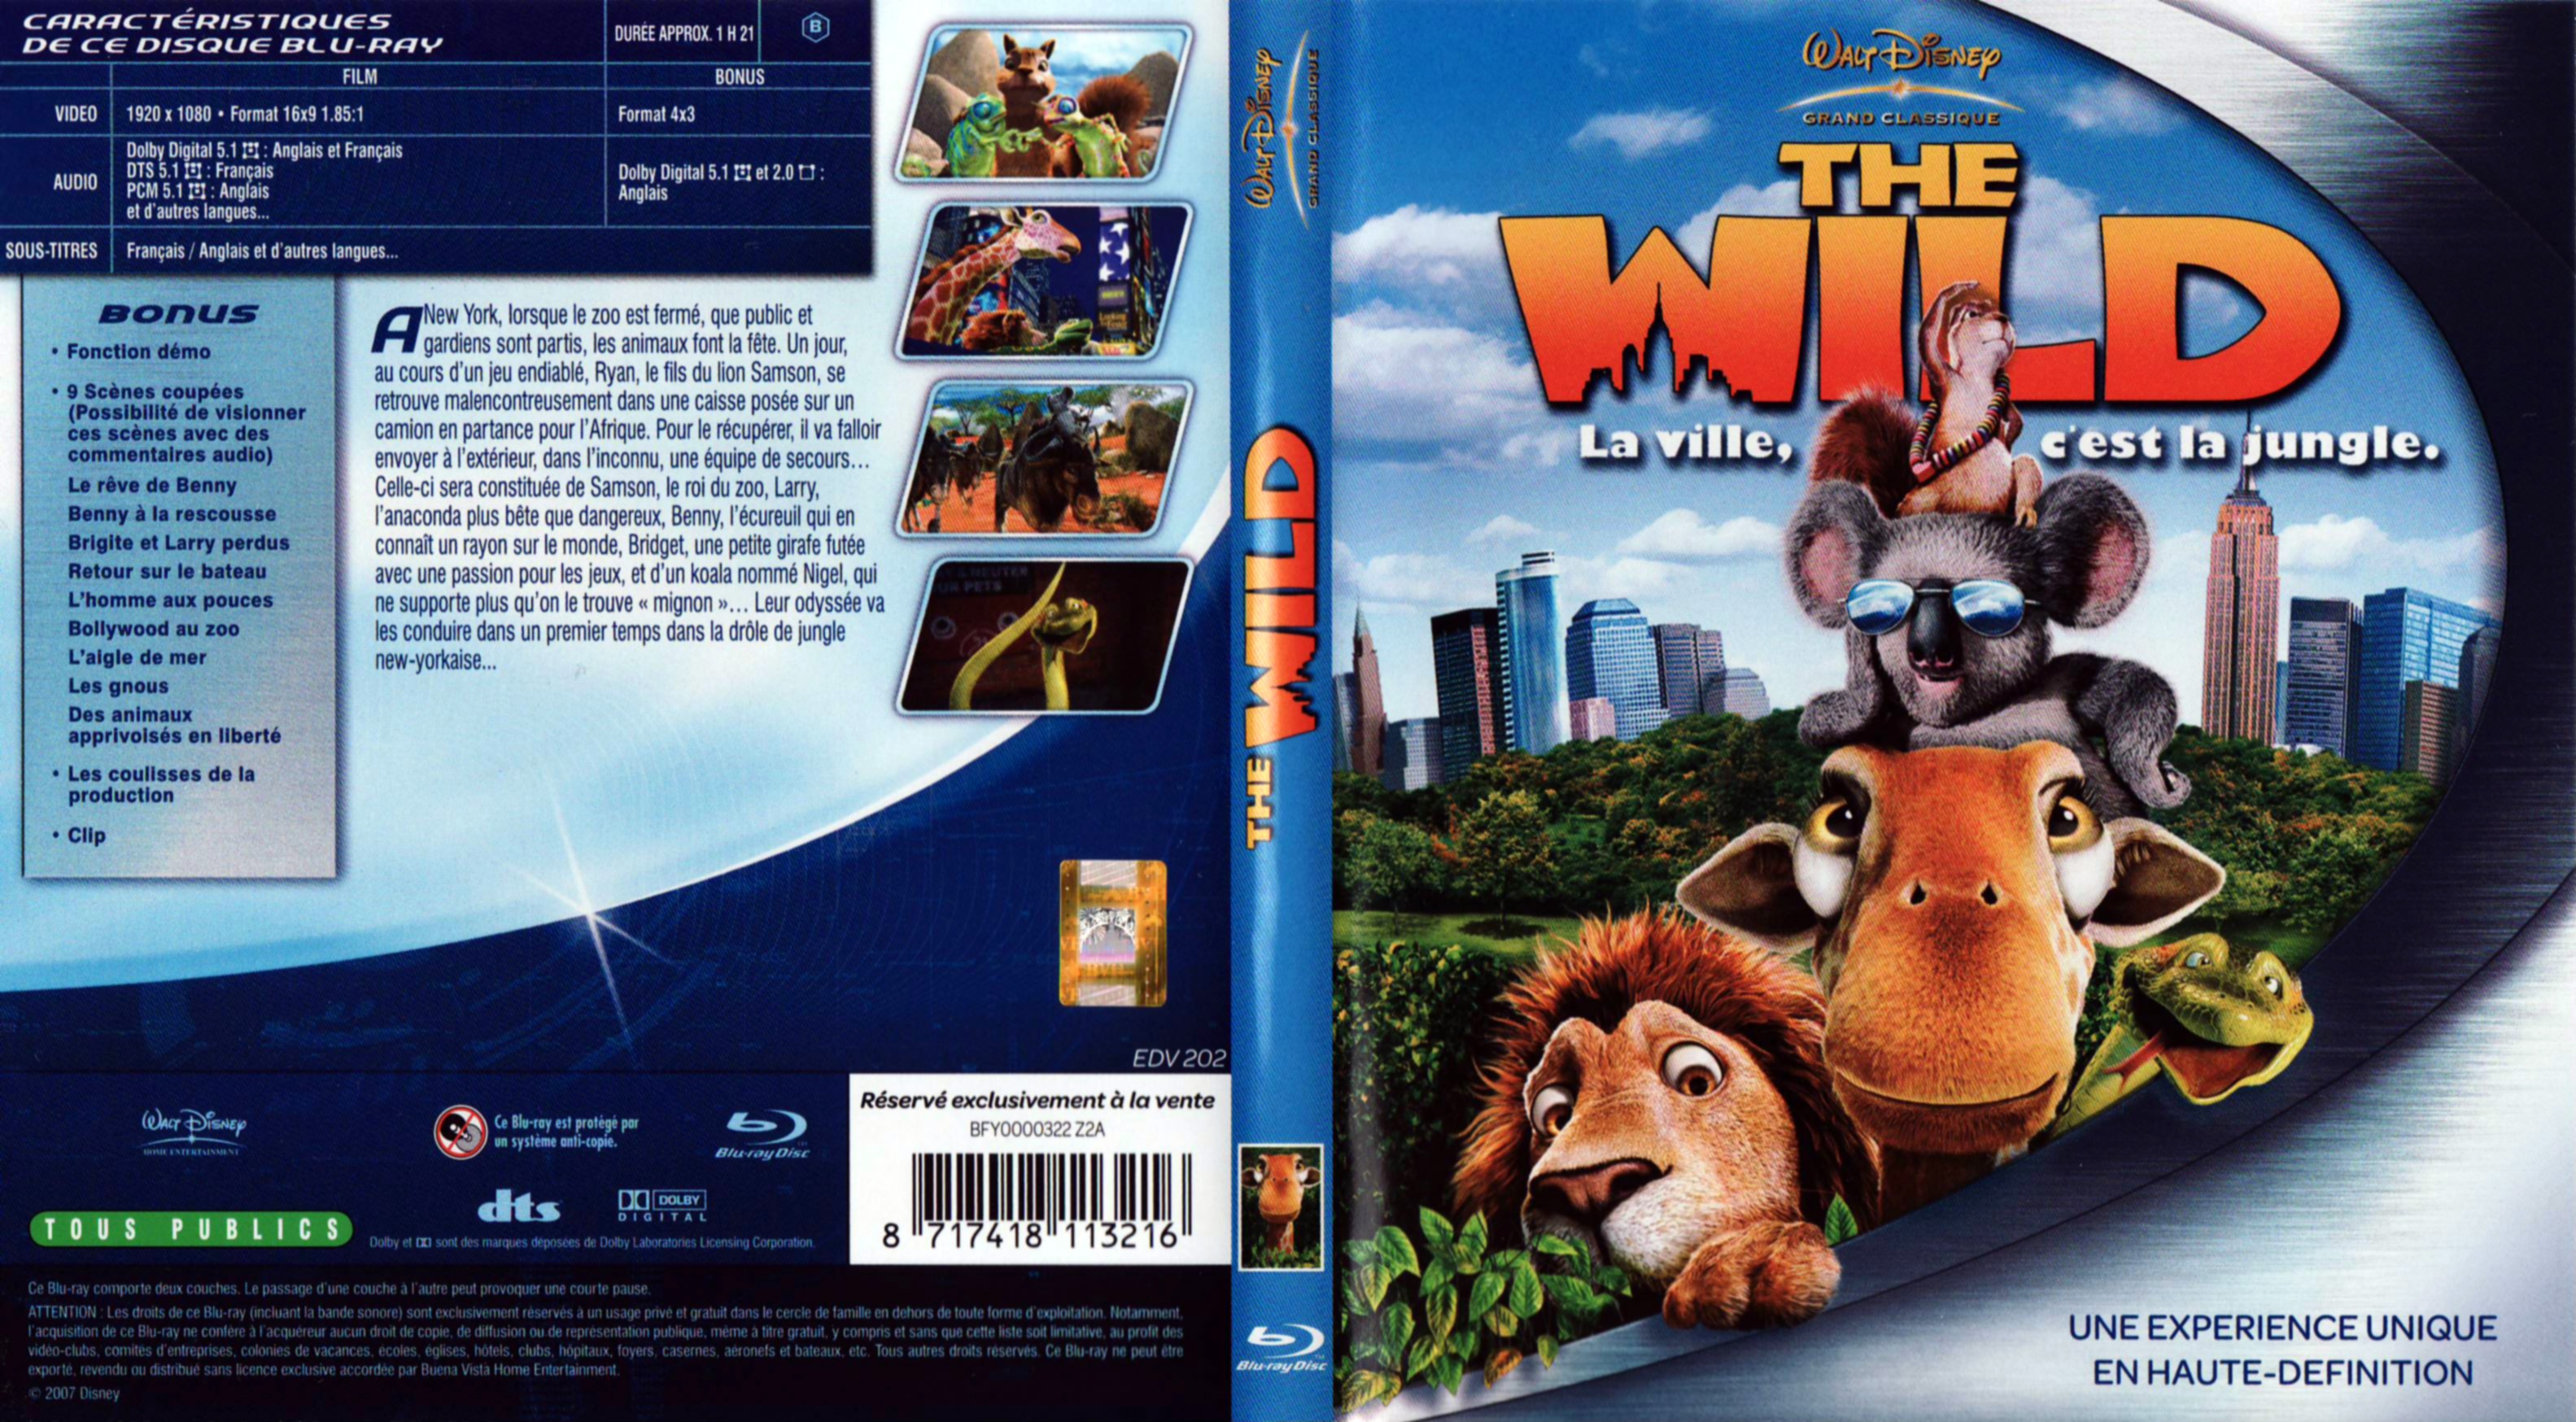 Jaquette DVD The wild (BLU-RAY)